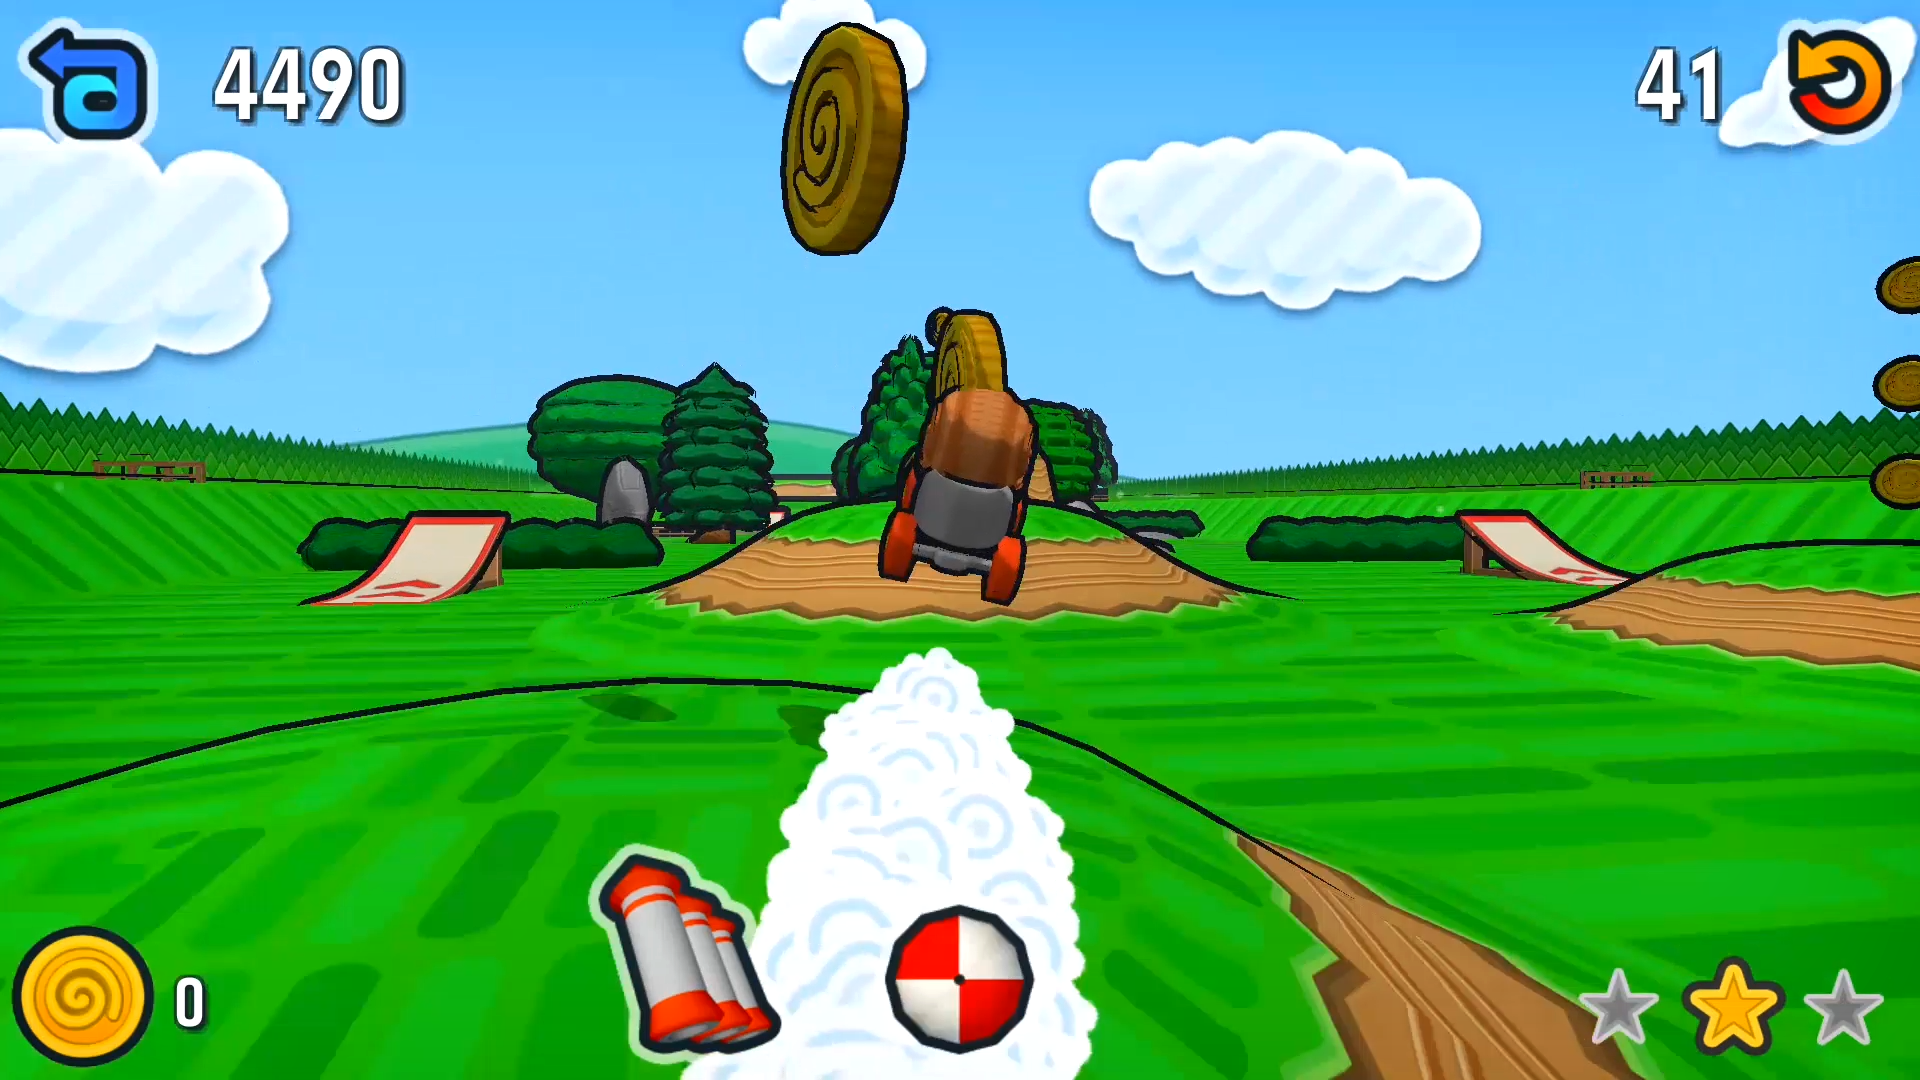 Deals of the day on the App Store: Escargot Kart, Glucose Buddy + for Diabetes, Button and more!